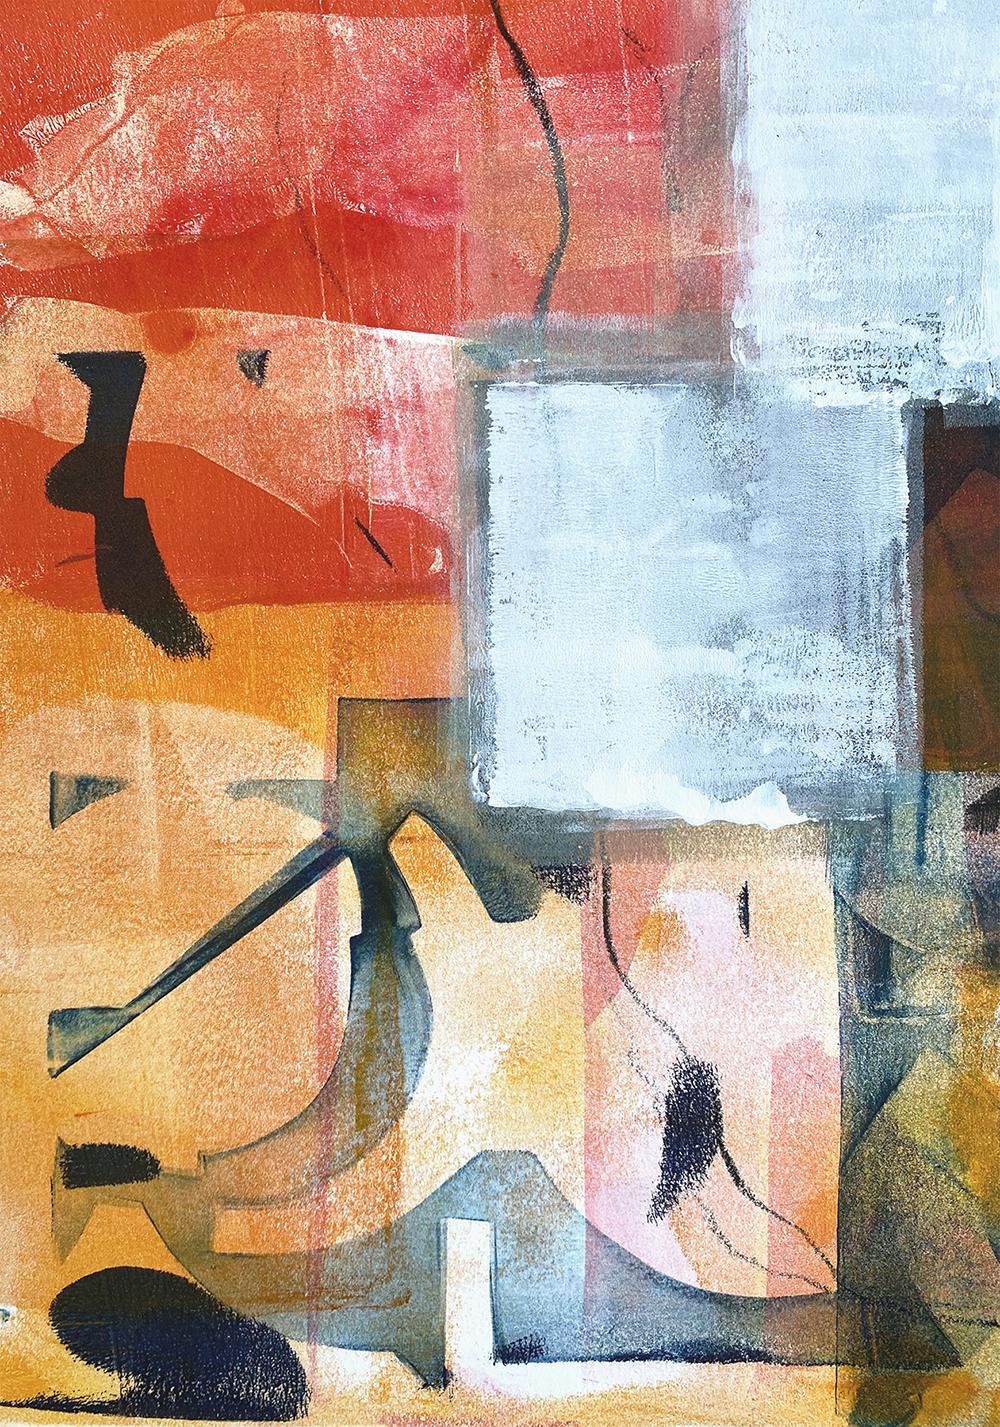 Monica DeSalvo’s “Build. Repair. Adjust.” is a 30 x 22 inch abstract graffiti-like acrylic “print” painting on paper. Bold curved shapes inspired by a Bauhaus teapot are stamped over blocks of indigo blue, yellow, ochre, pink, shades of white, and a